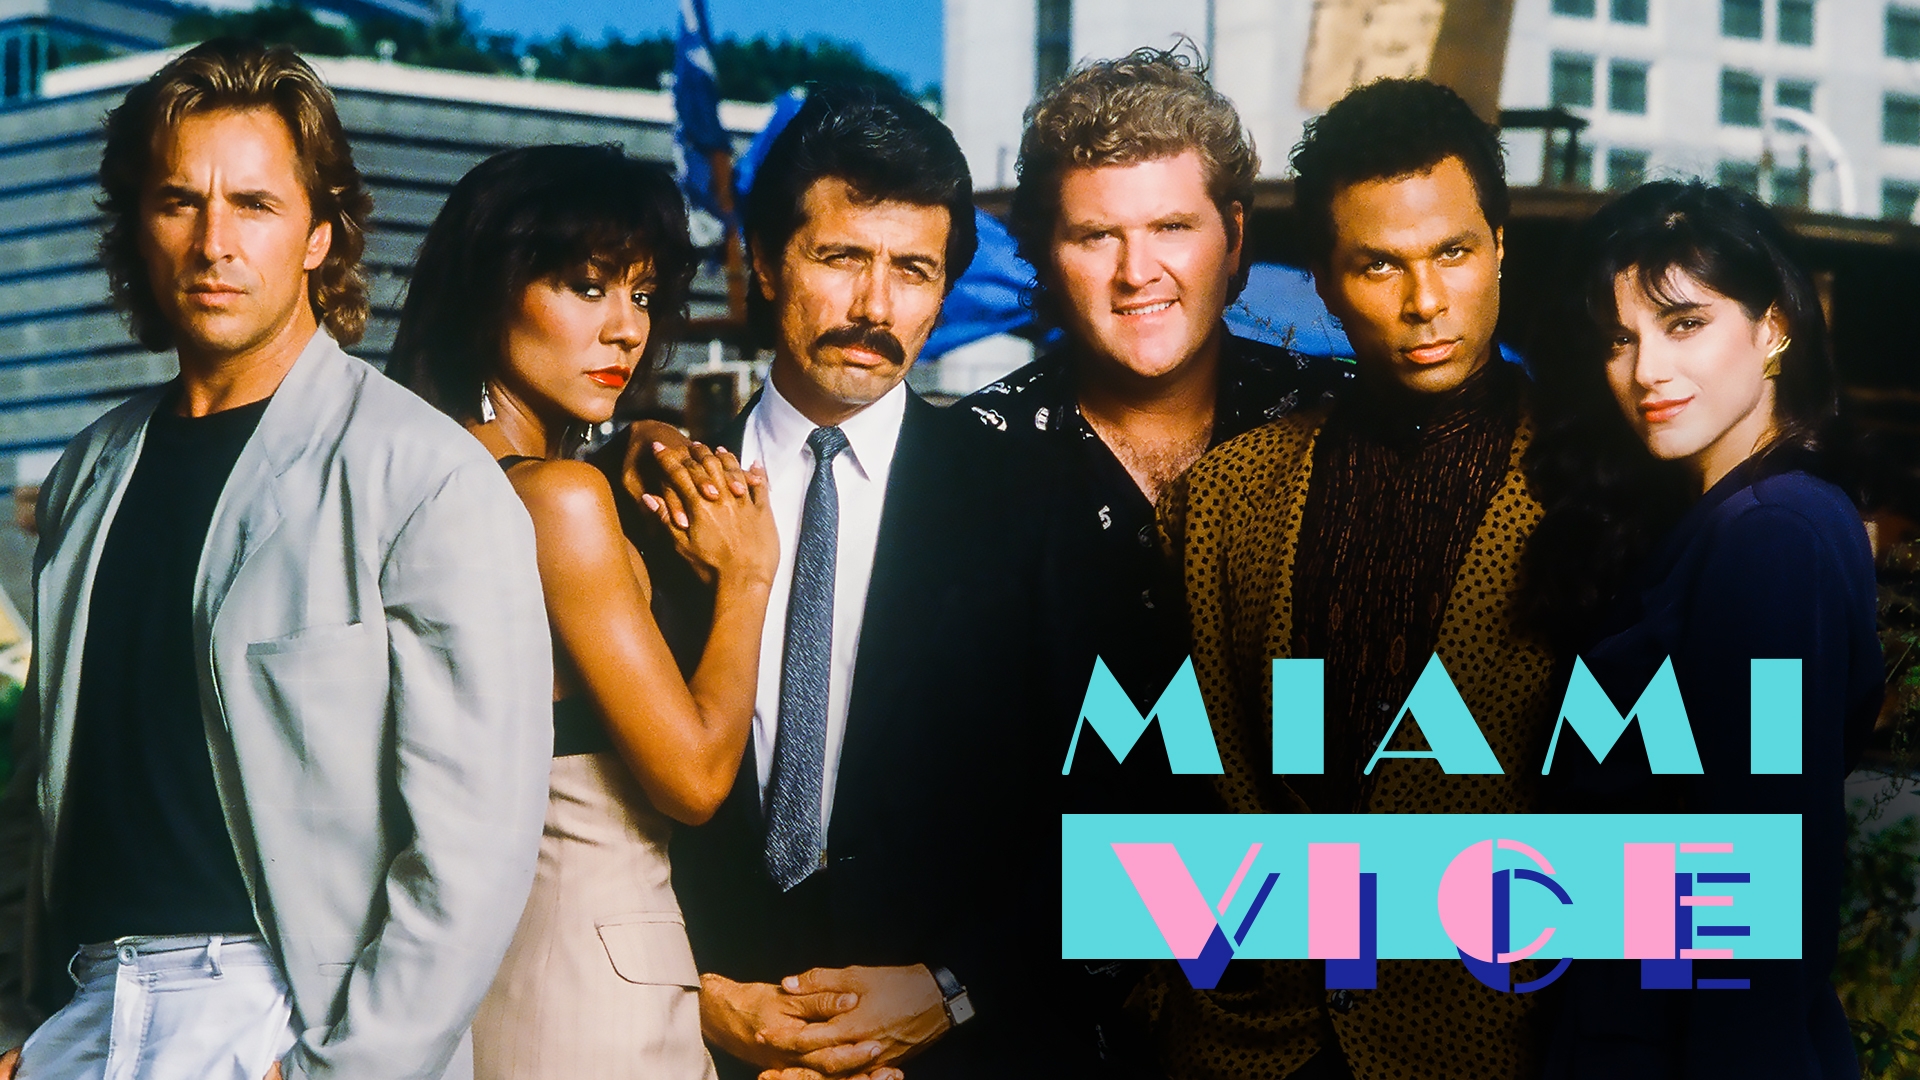 Promotional image for 1980s television show "Miami Vice"